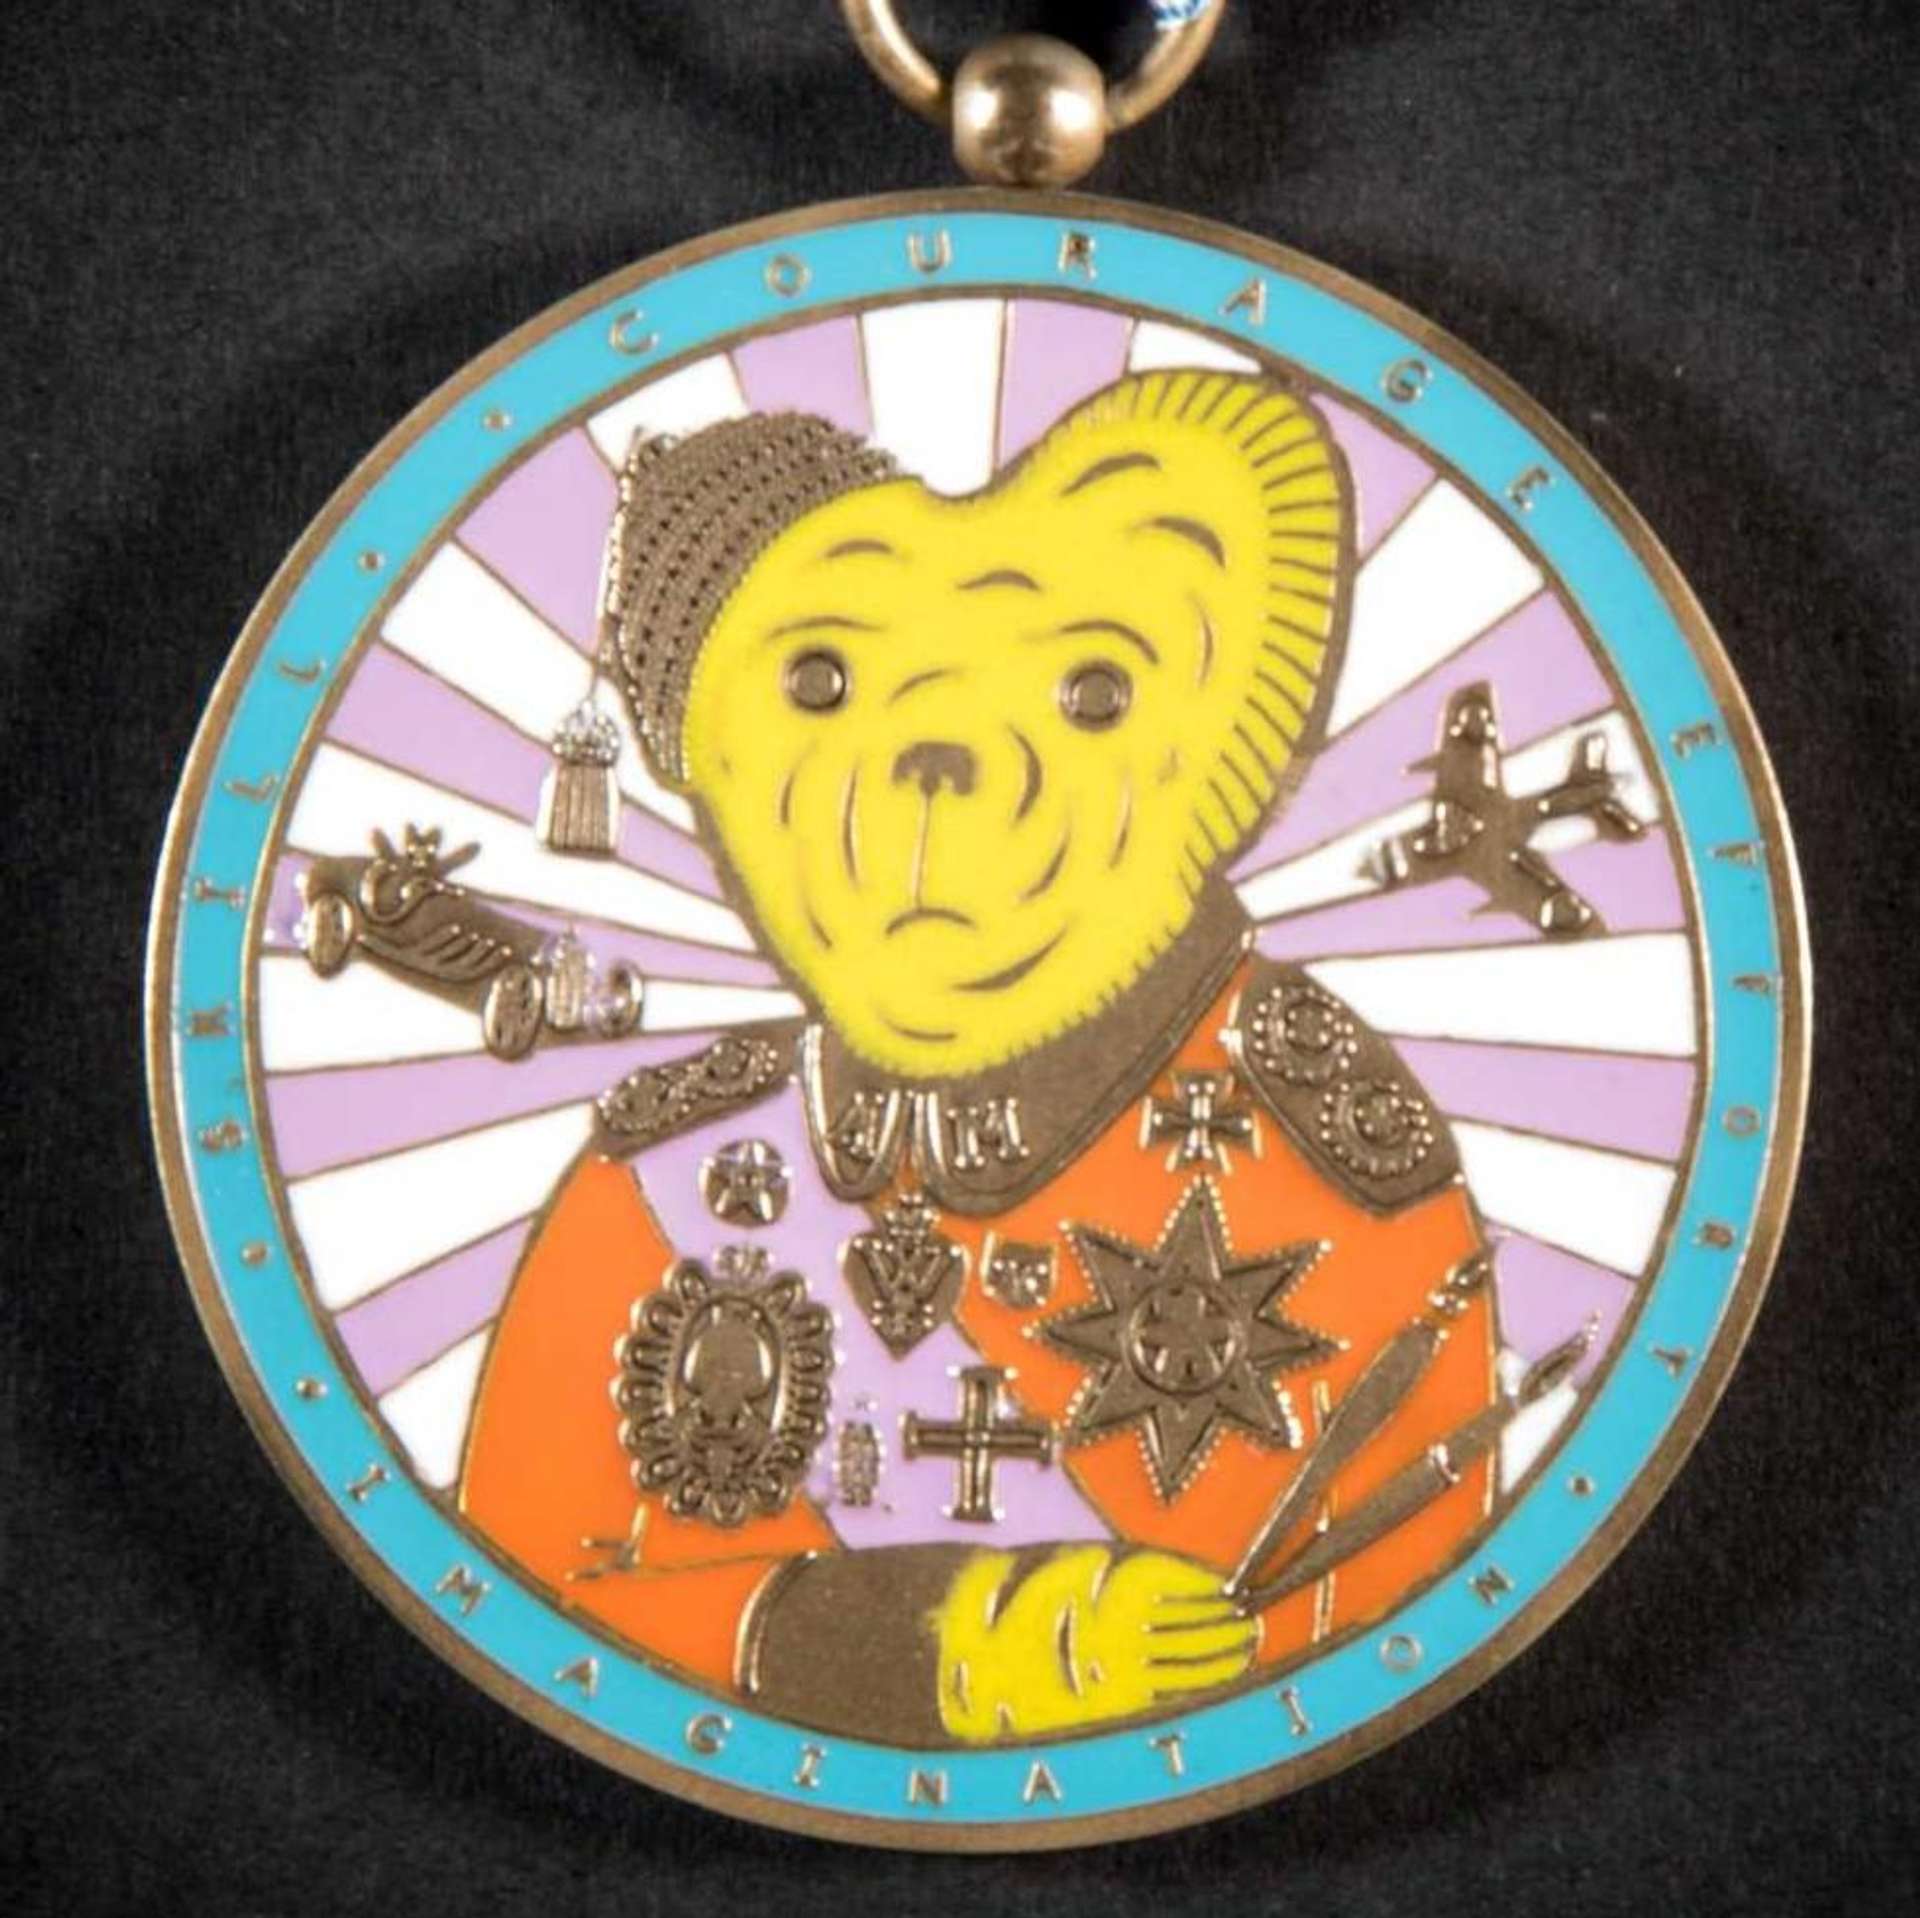 A vividly colourful medal, also known as Teddy Bear Medal, portrays the artist’s own childhood teddy bear in the guise of an artist turned war hero, while a radiating pattern emanates from the toy and a plane and car reference wartime.